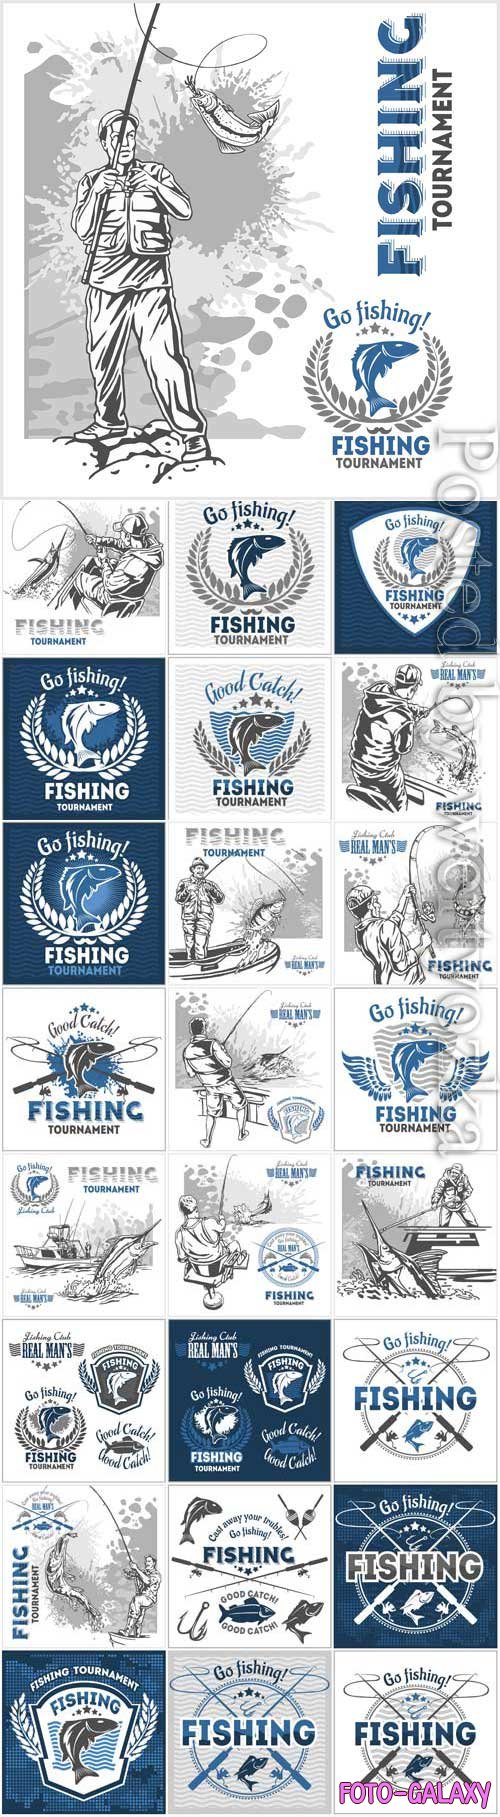 Fishing labels and logos in vector